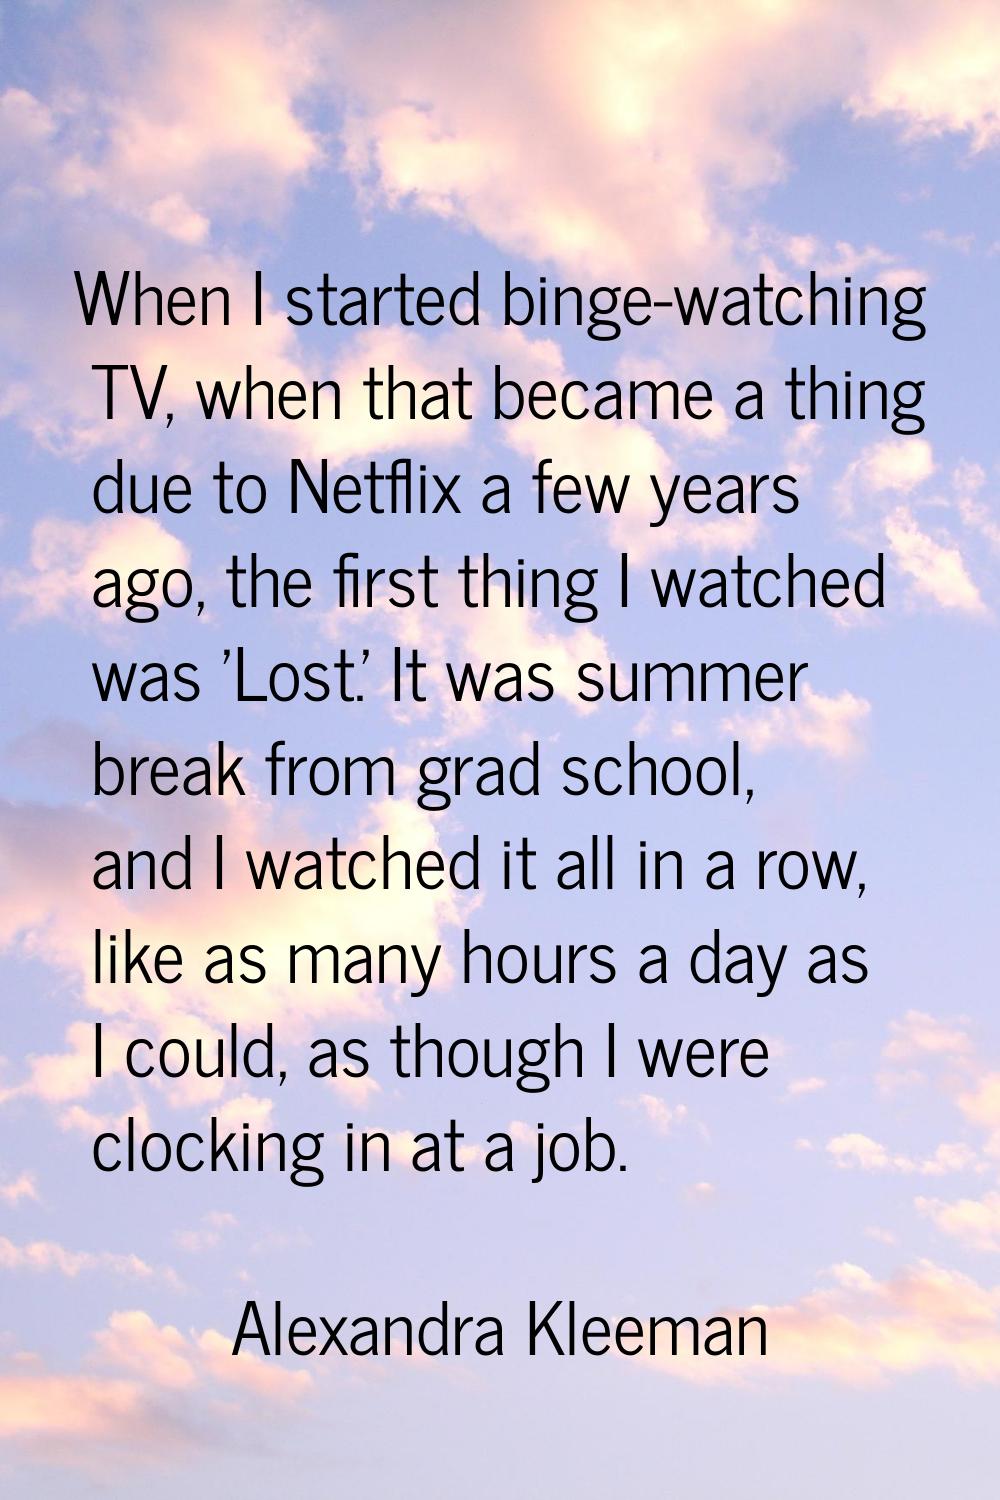 When I started binge-watching TV, when that became a thing due to Netflix a few years ago, the firs